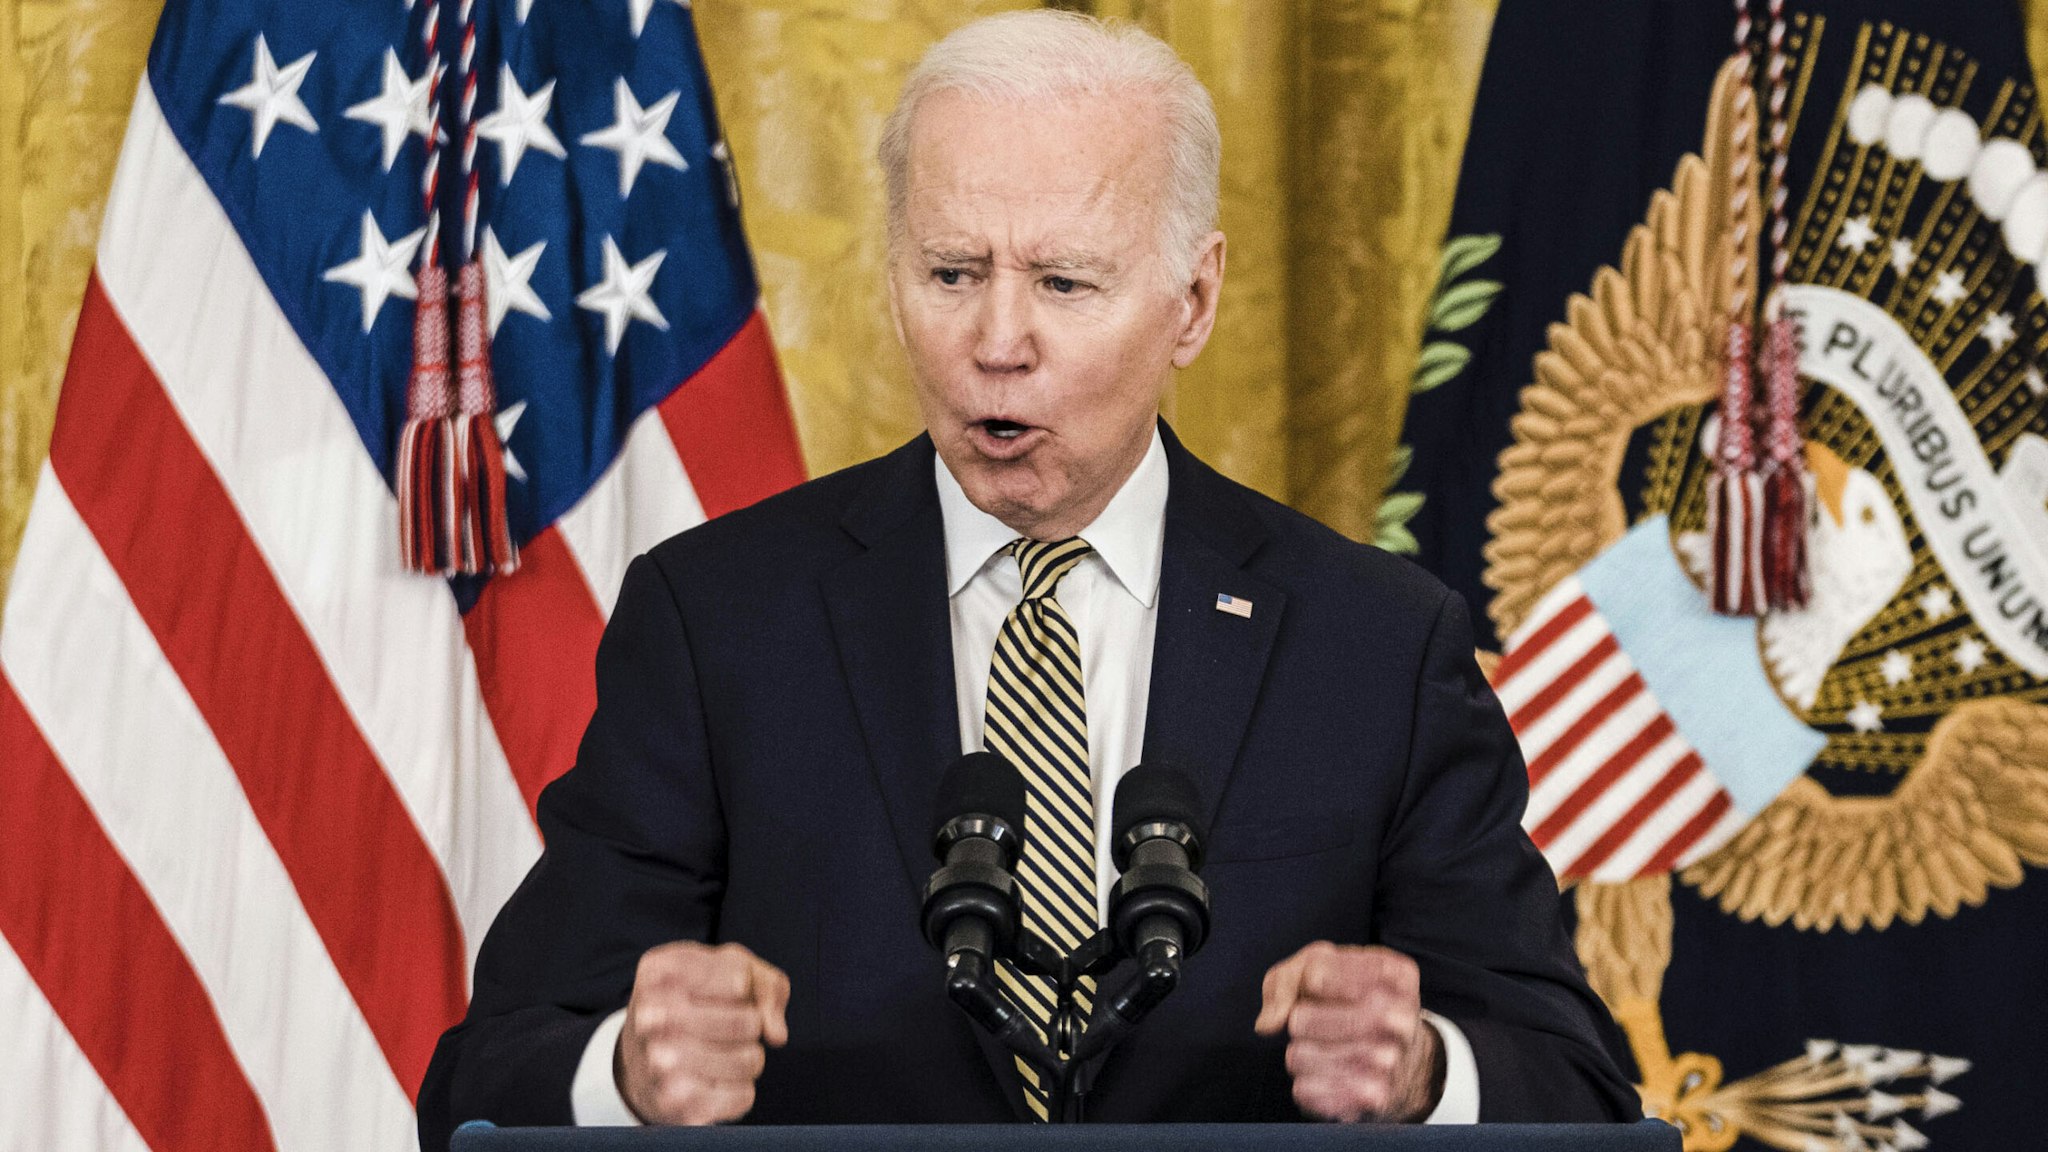 WASHINGTON, DC - MARCH 16: President Joe Biden speaks during an event celebrating the reauthorization of the Violence Against Women Act (VAWA) in the East Room of the White House on Wednesday, March 16, 2022 in Washington, DC.